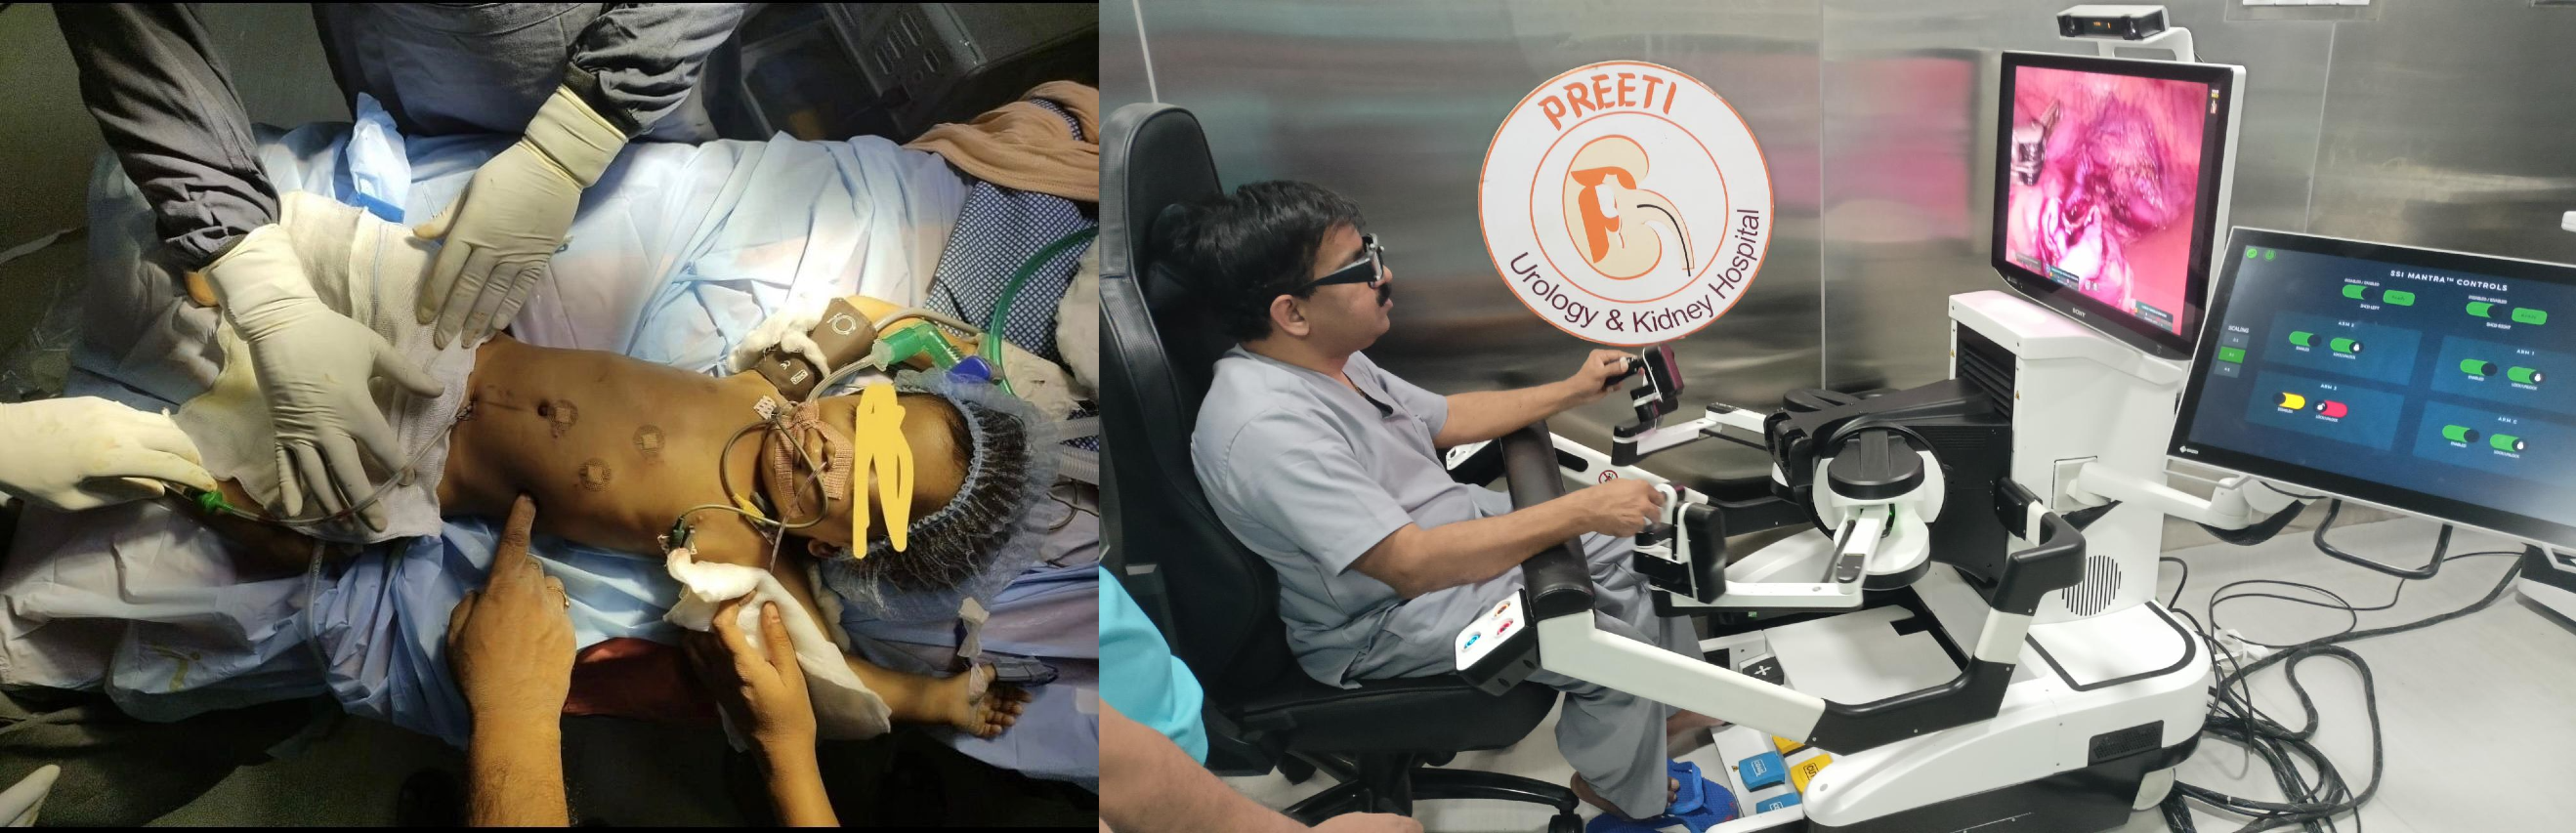 ‘Made in India’ Surgical Robot SSI Mantra takes giant baby step